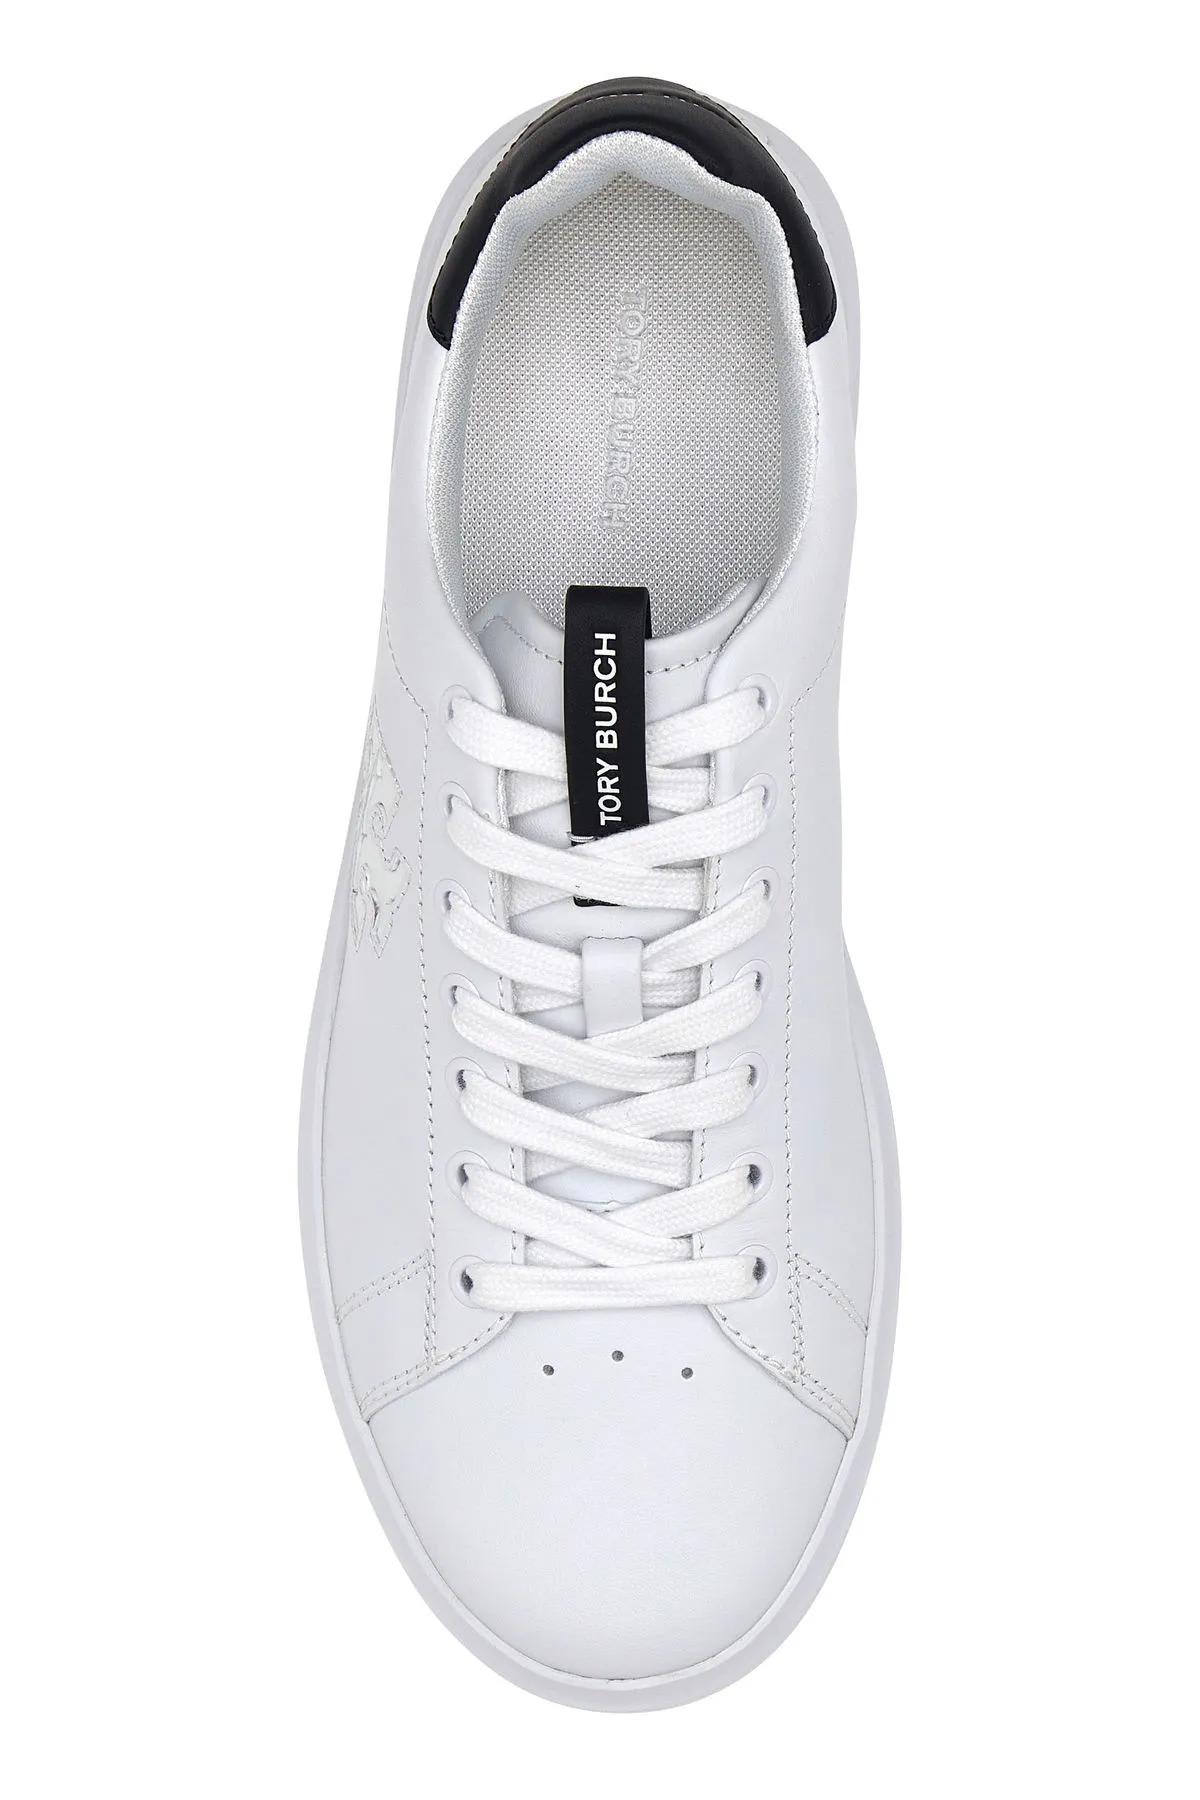 Shop Tory Burch Chalk Leather Howell Court Sneakers